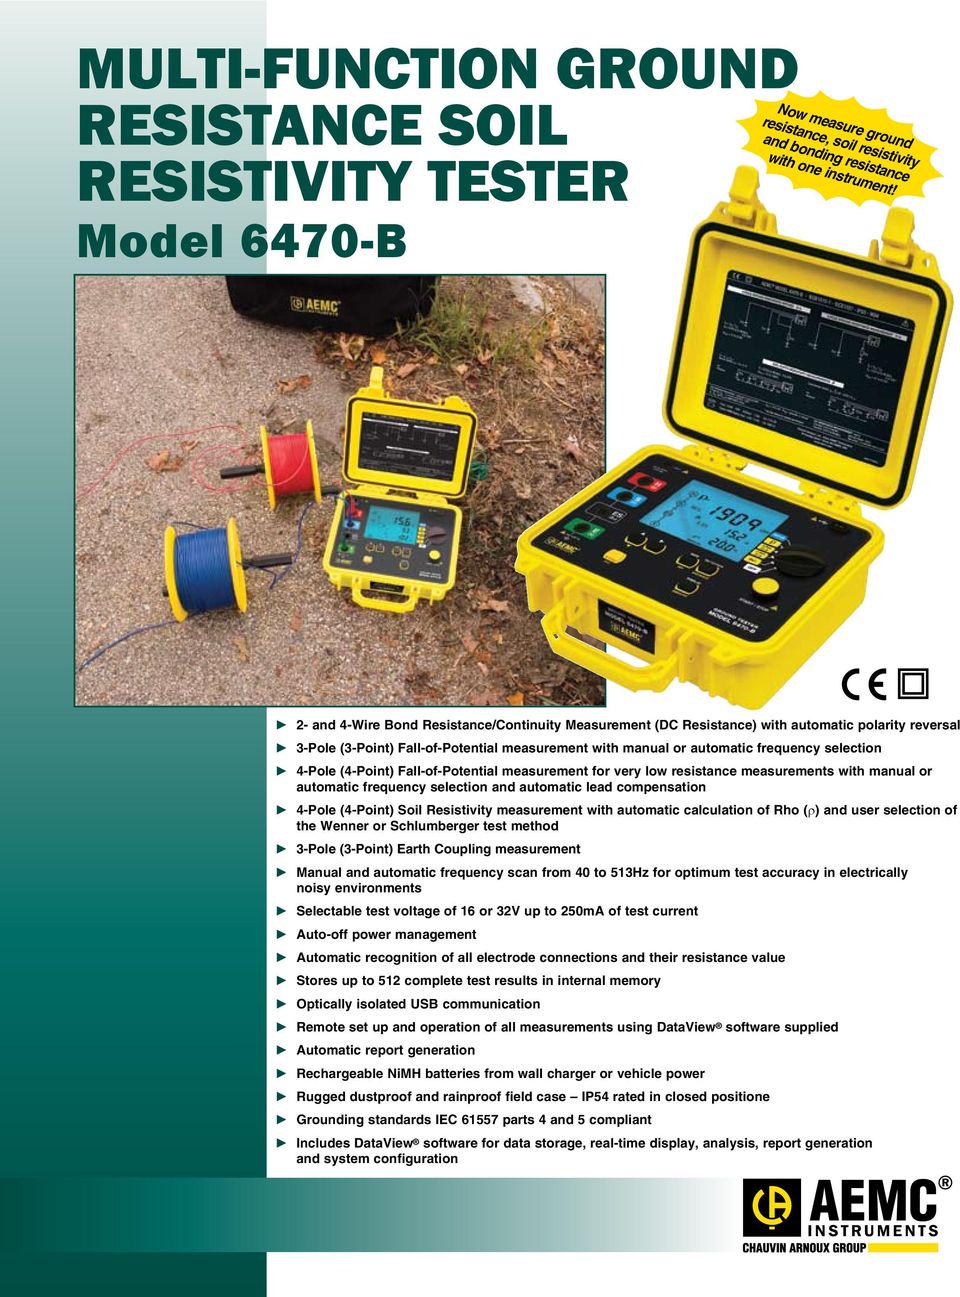 4-Pole (4-Point) Fall-of-Potential measurement for very low resistance measurements with manual or automatic frequency selection and automatic lead compensation 4-Pole (4-Point) Soil Resistivity